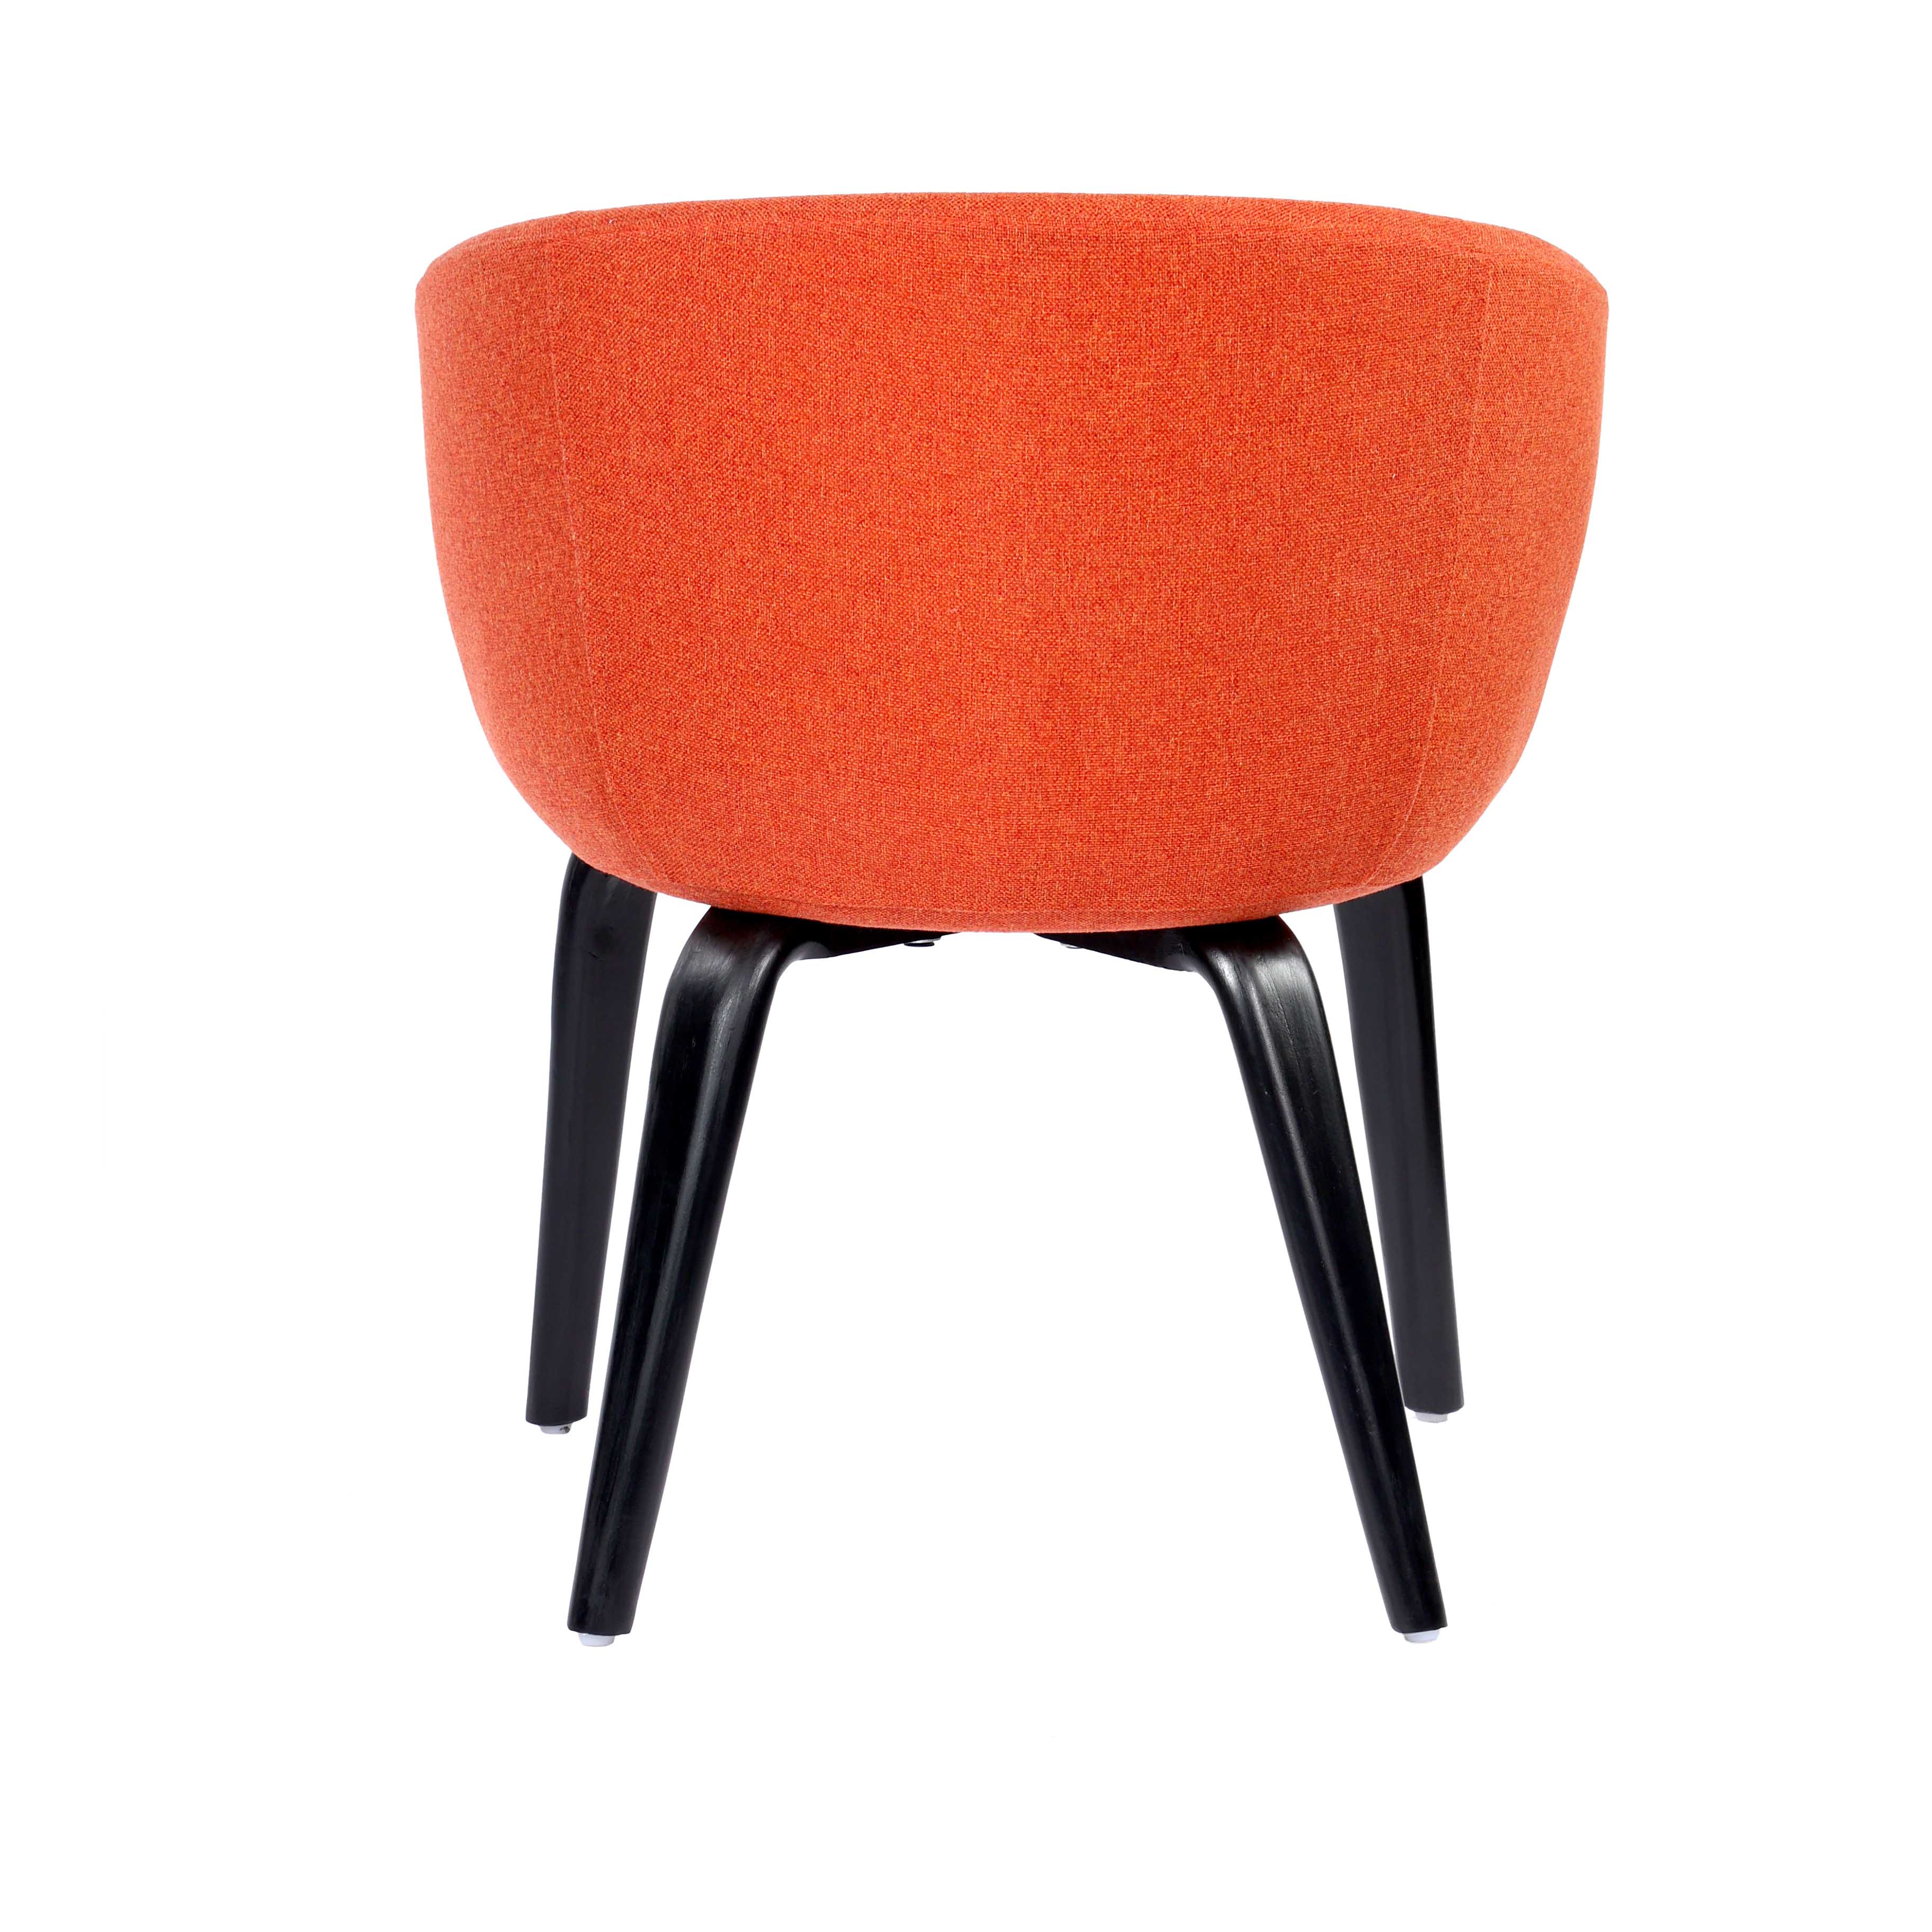 Emilia Modern Fabric Upholstered Lounge Chair With with Wooden Legs - Orange